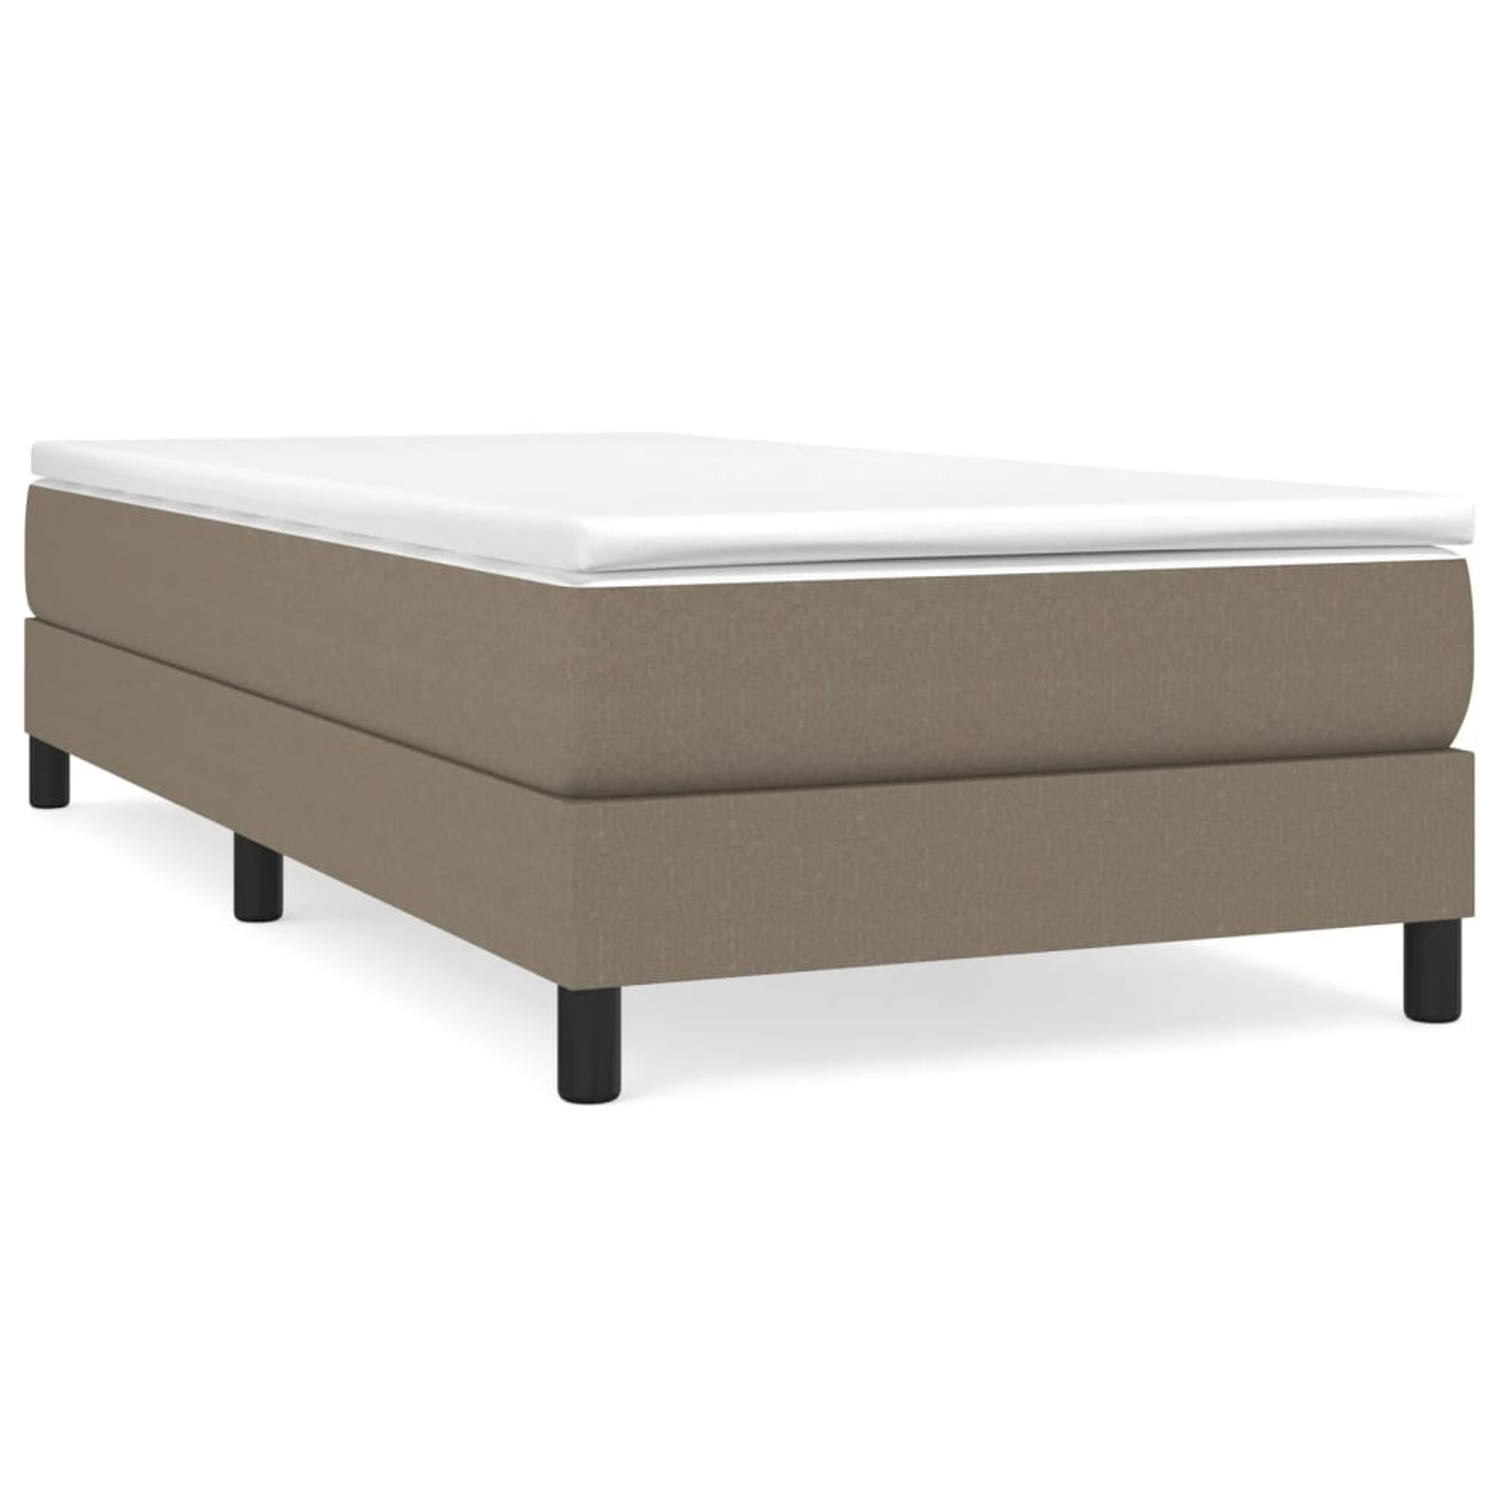 The Living Store Boxspringframe stof taupe 90x190 cm - Boxspringframe - Boxspringframes - Bed - Ledikant - Slaapmeubel - Bedframe - Bedbodem - Eenpersoonsbed - Boxspring - Bedden -